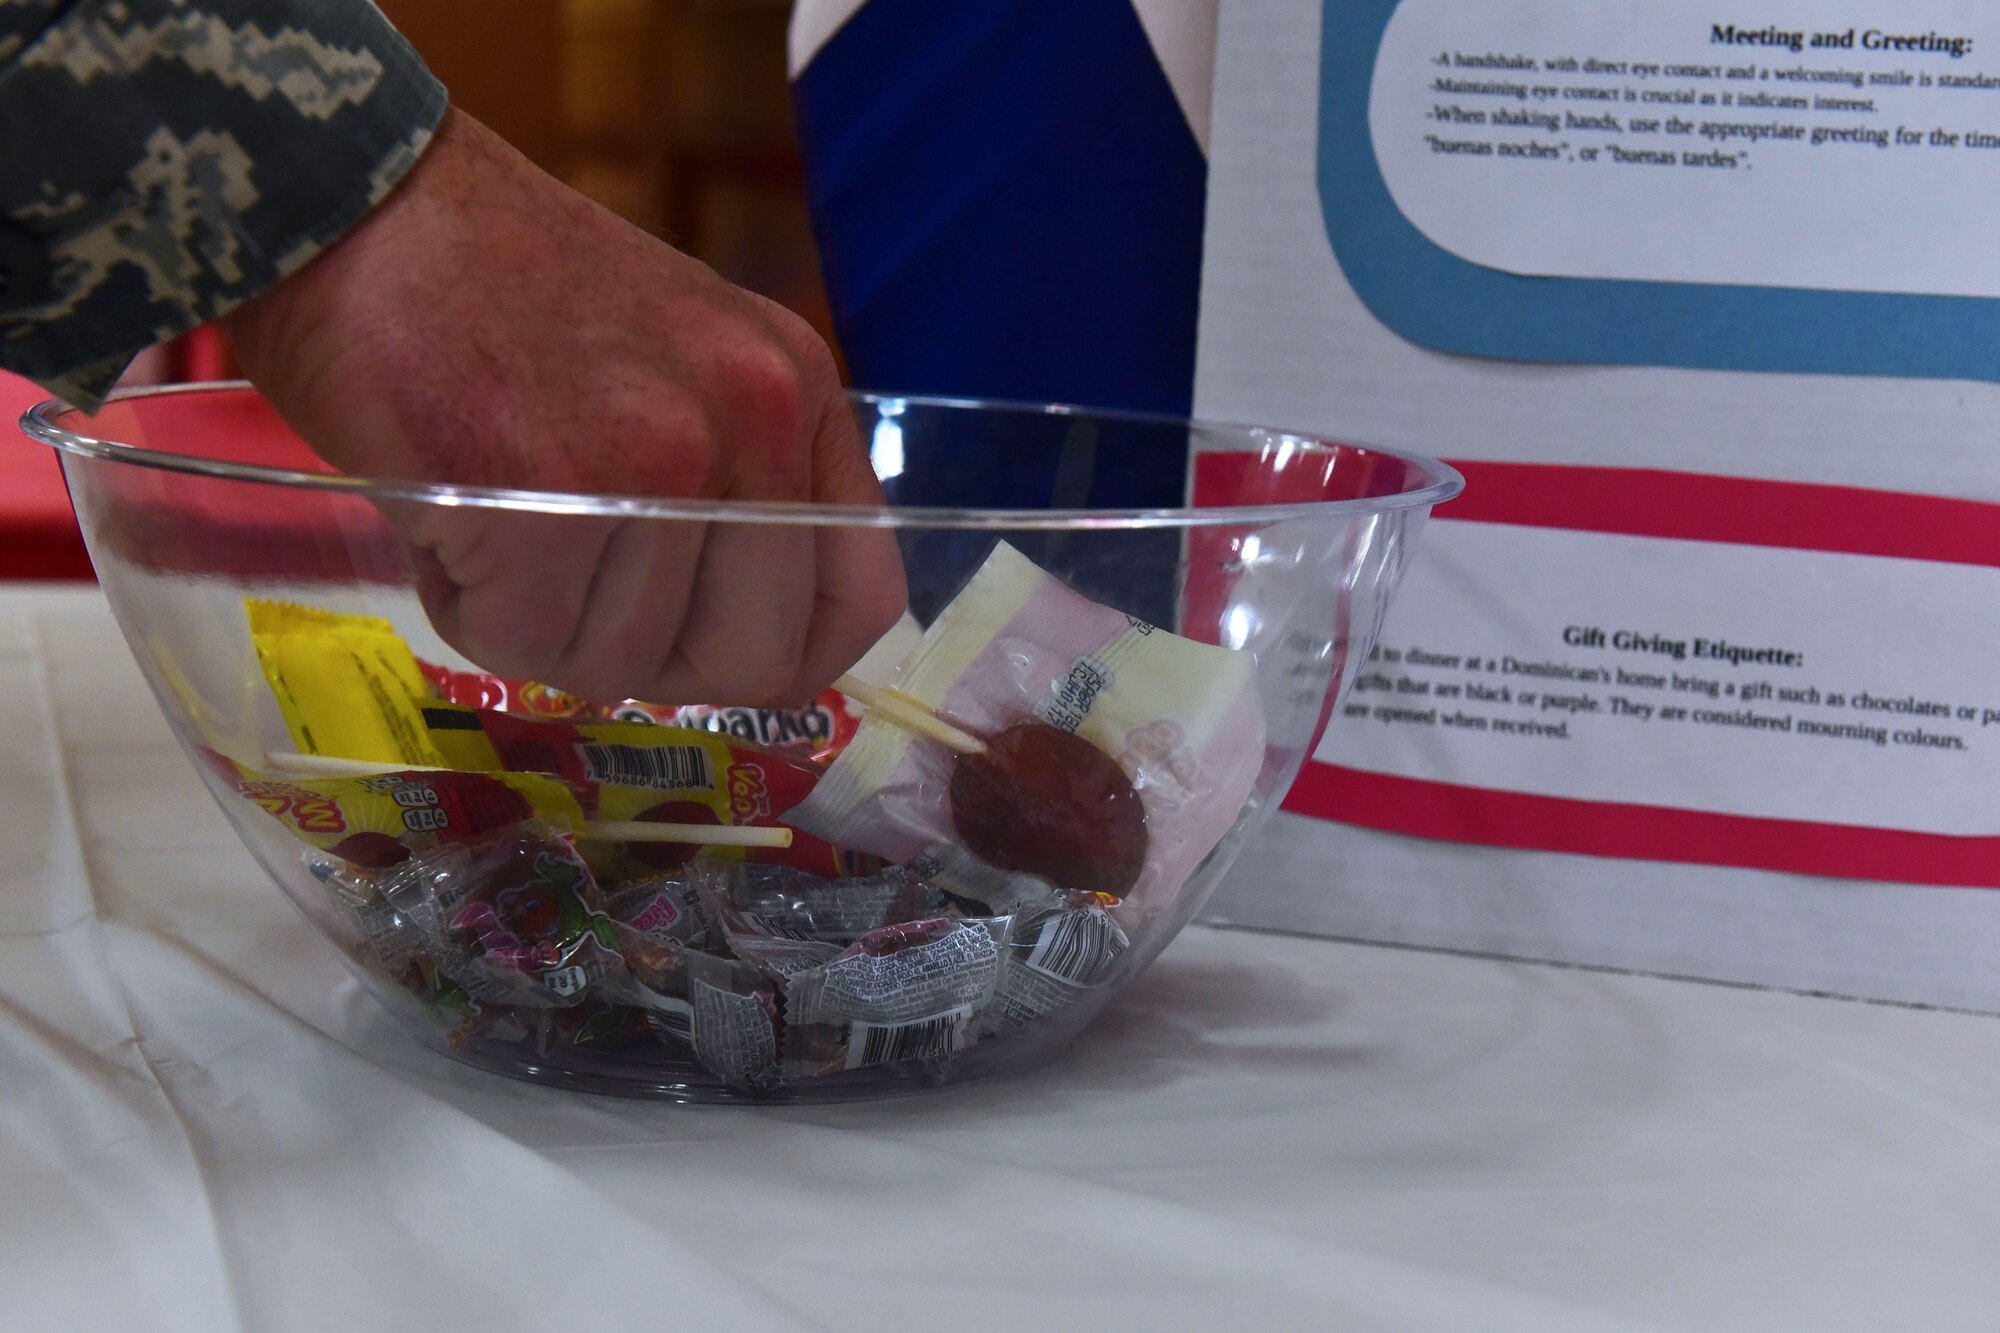 An attendee of the Hispanic Heritage Month Info Fair samples a piece of candy Sept. 29, 2017, at Walter’s Community Support Center on Little Rock Air Force Base, Ark. There were numerous booths featuring various Hispanic countries with candy from each country available. (U.S. Air Force photo by  Airman Rhett Isbell)